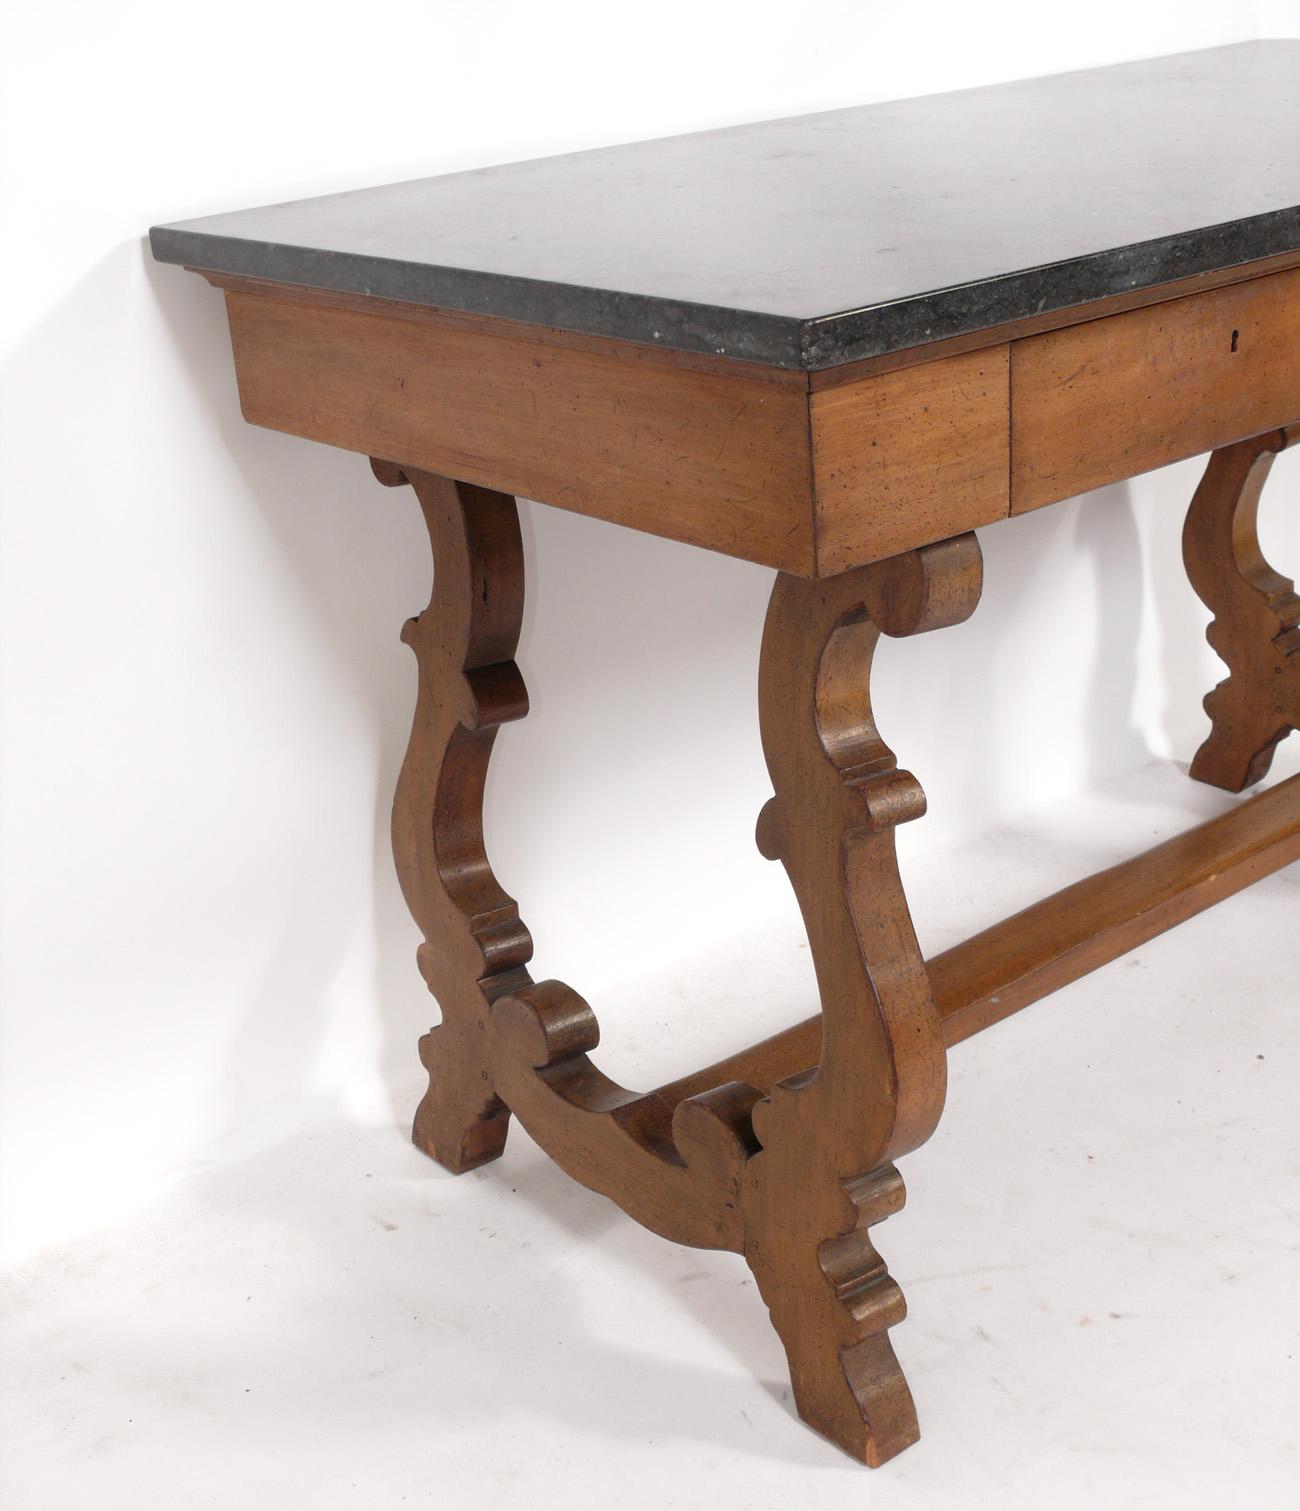 French marble top desk, France, circa 1940s. Retains warm original patina. This piece is a versatile size and can be used a desk, console table, server, or bar.